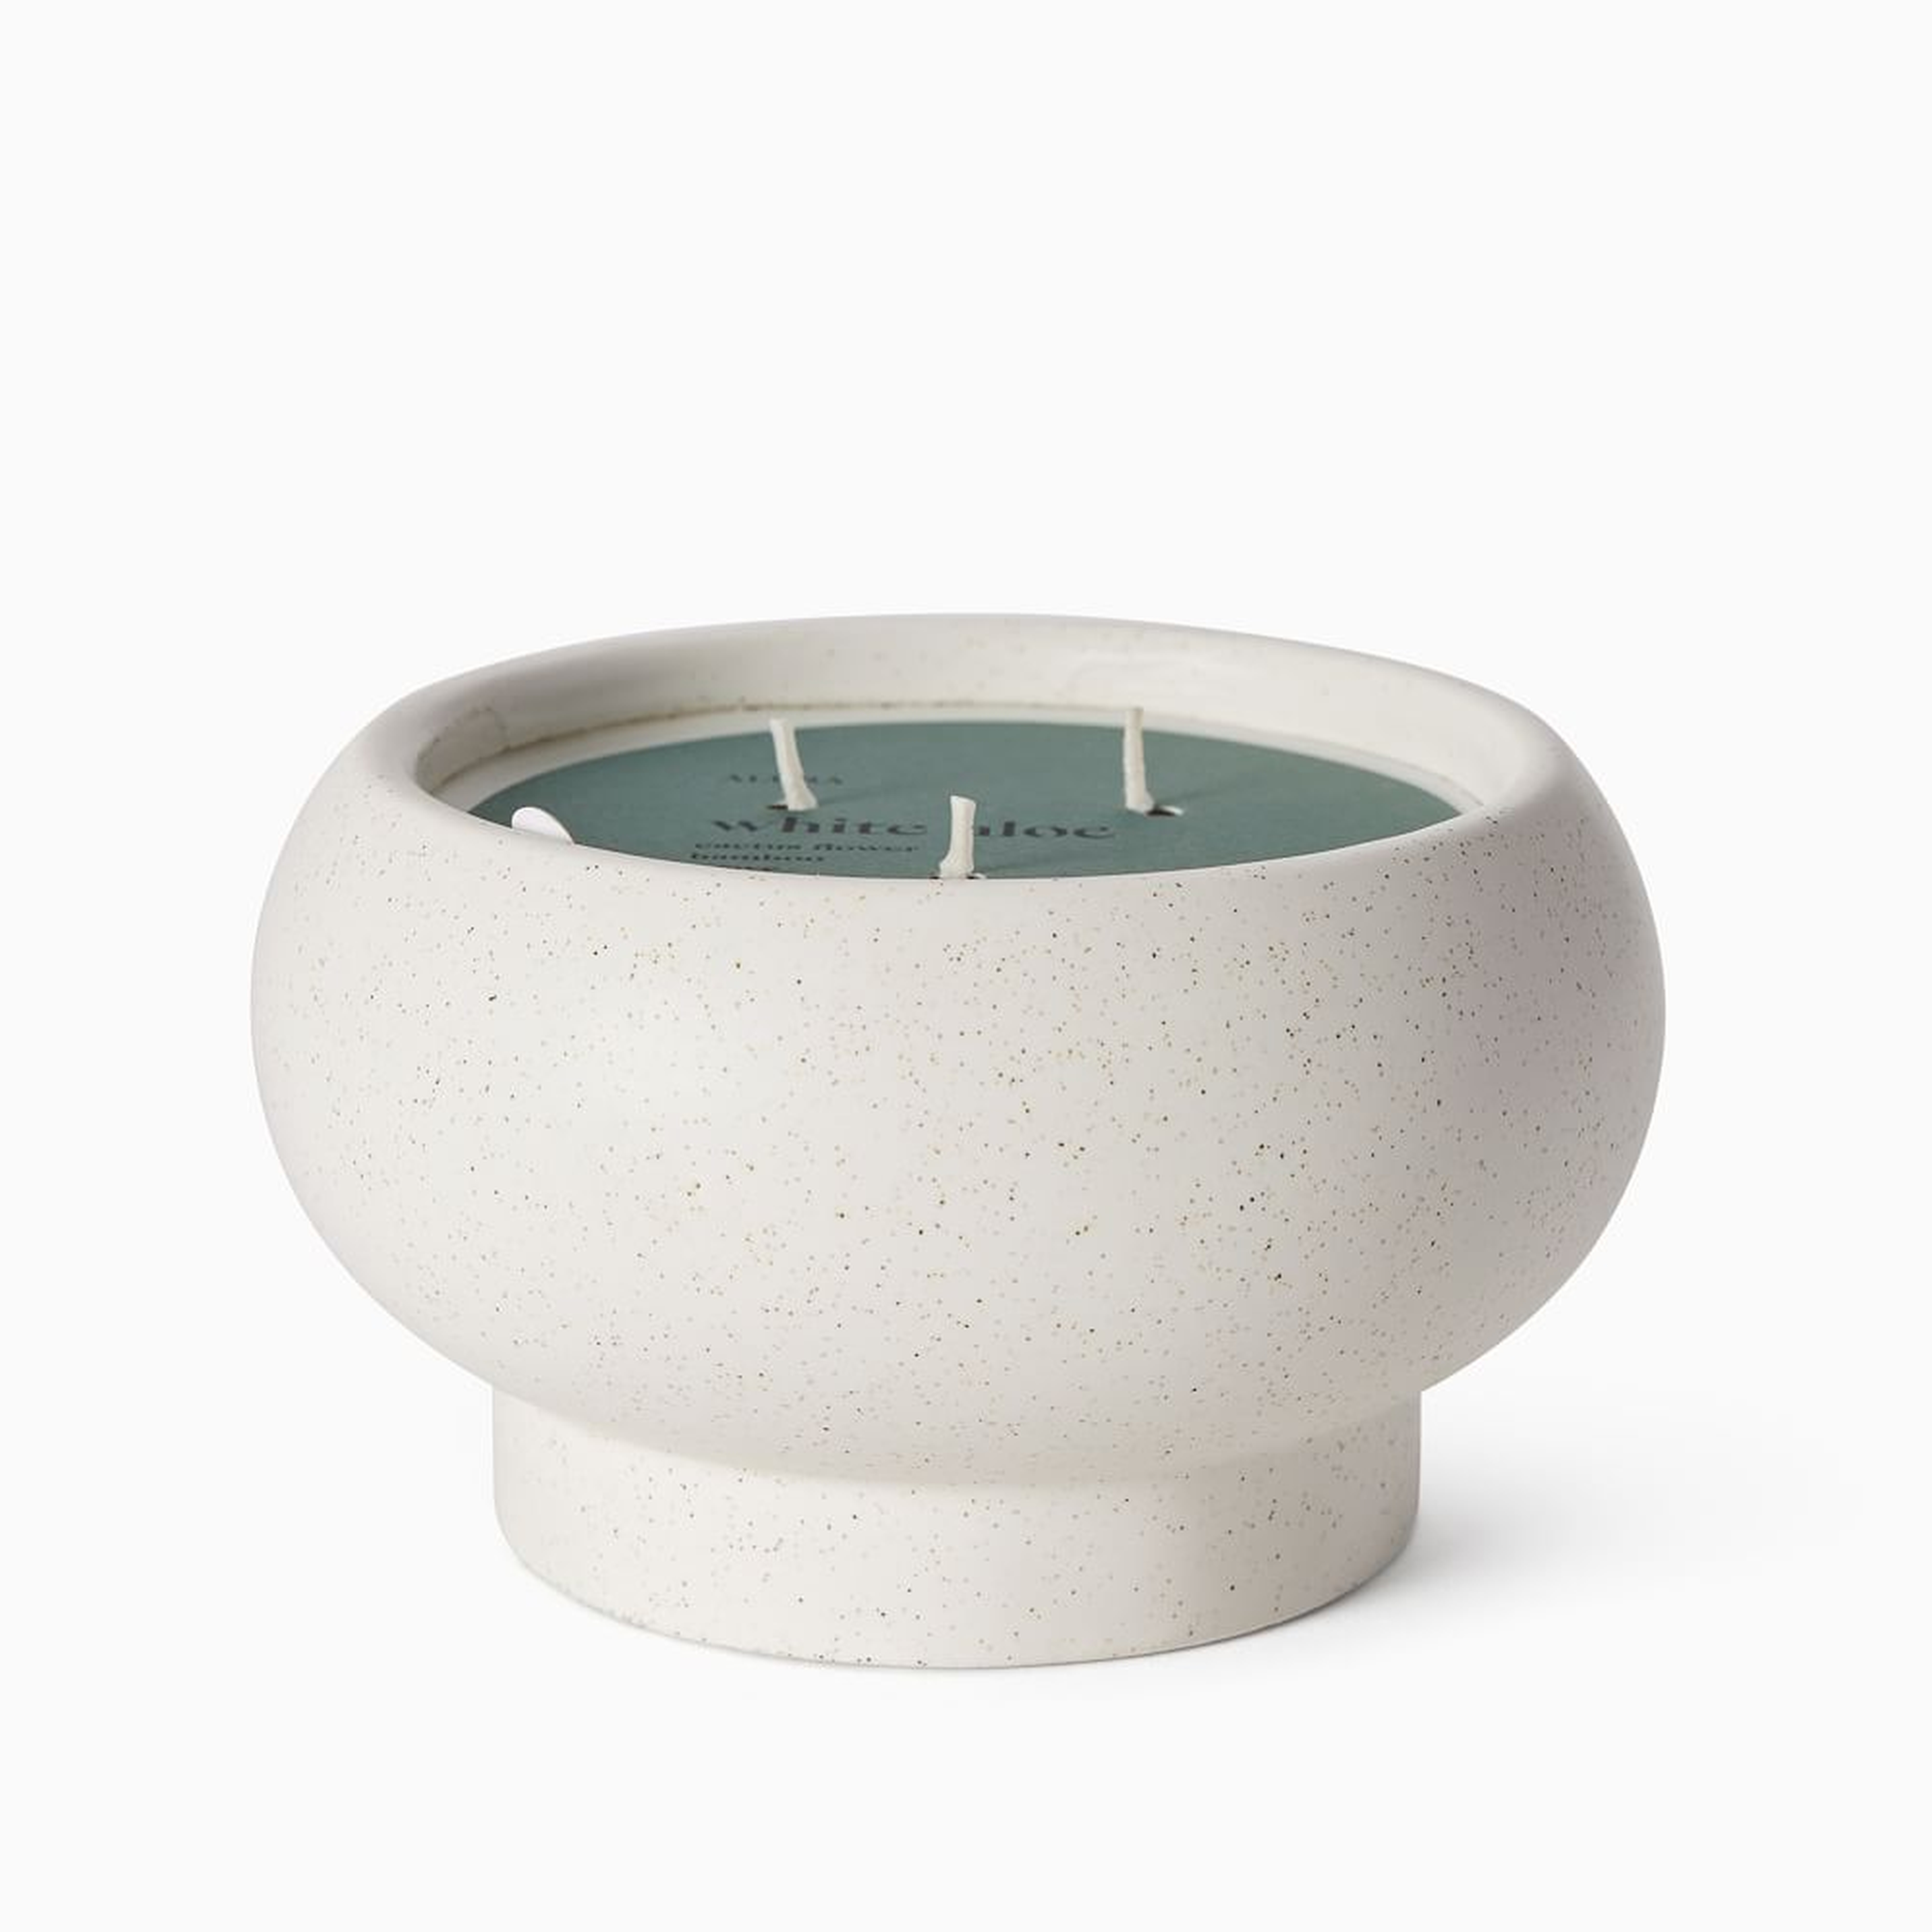 Alura Collection, Filled Candle 3 Wick, Ceramic, White Aloe - West Elm